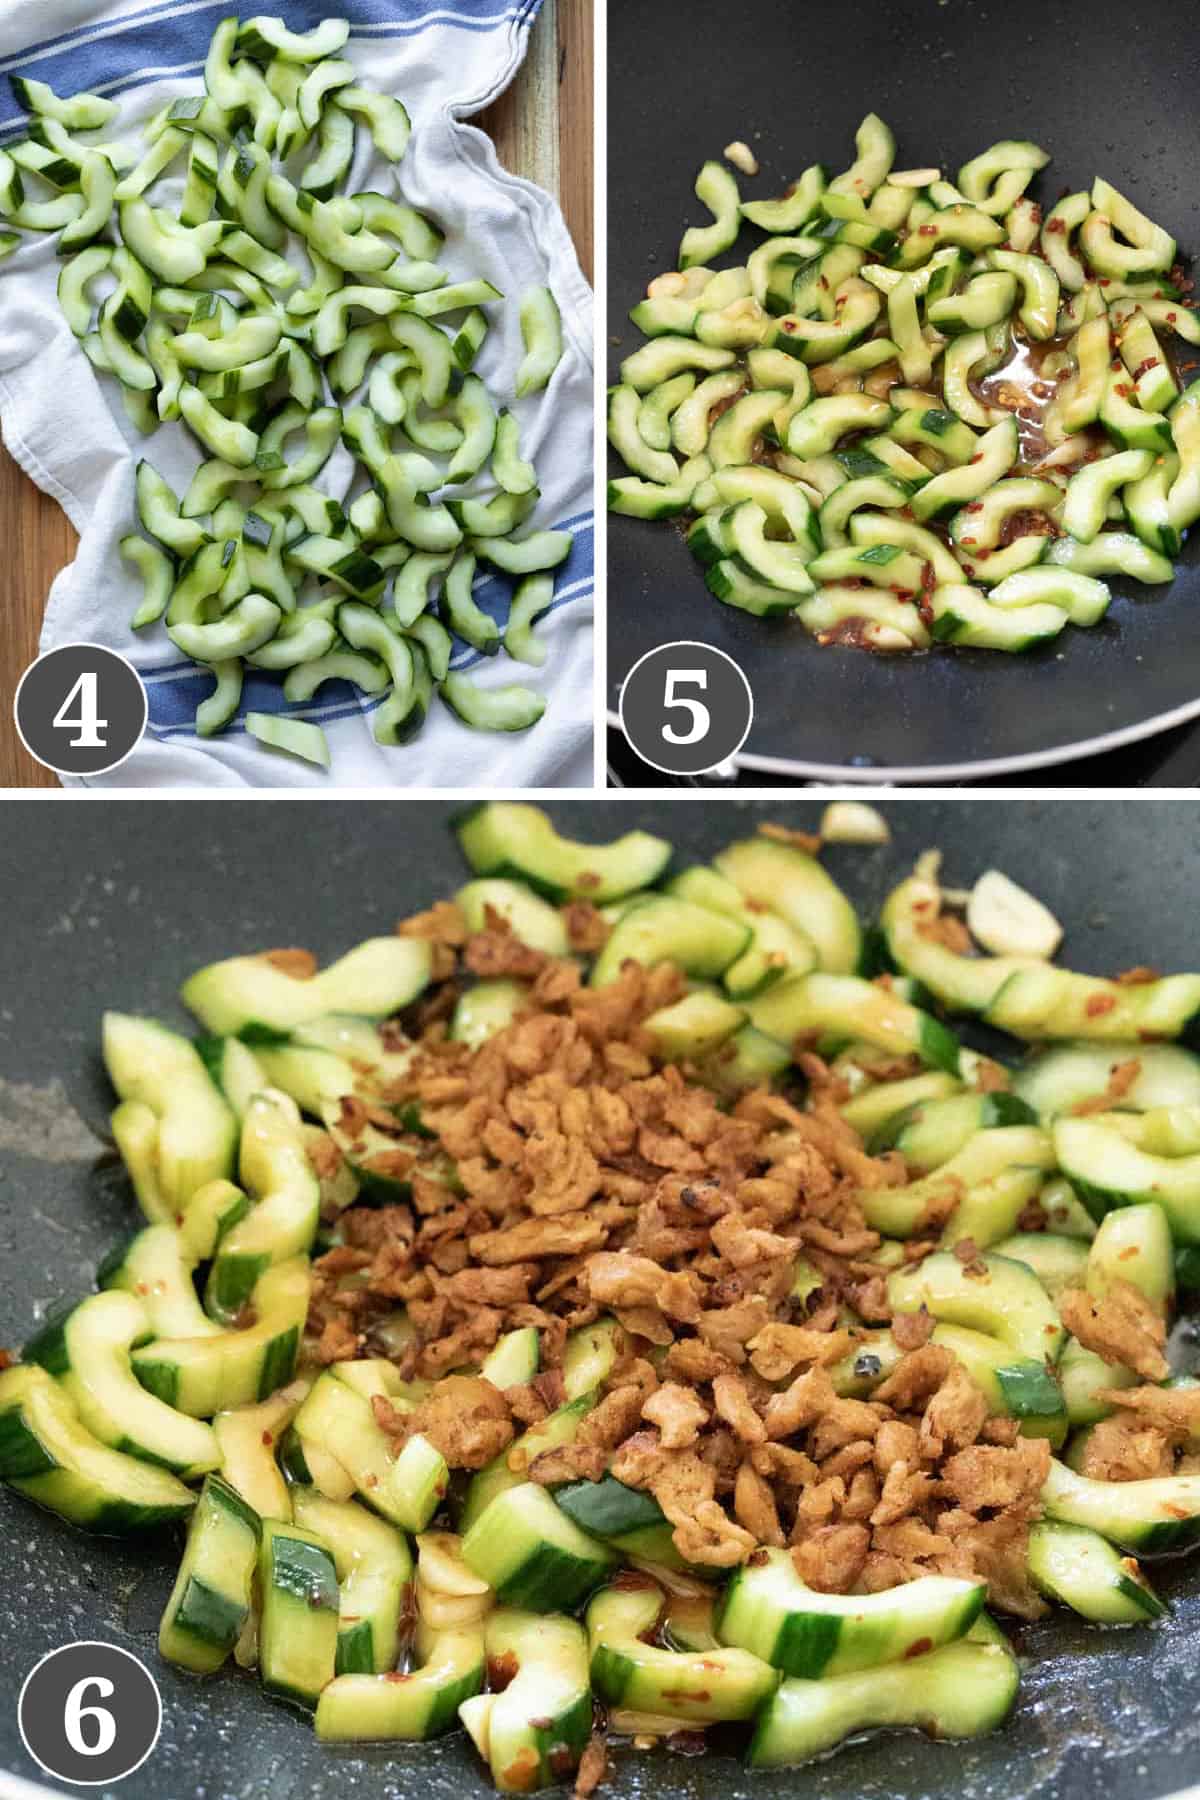 A collage of 3 photos showing how to stir fry cucumbers and combine with sauce and mock pork.